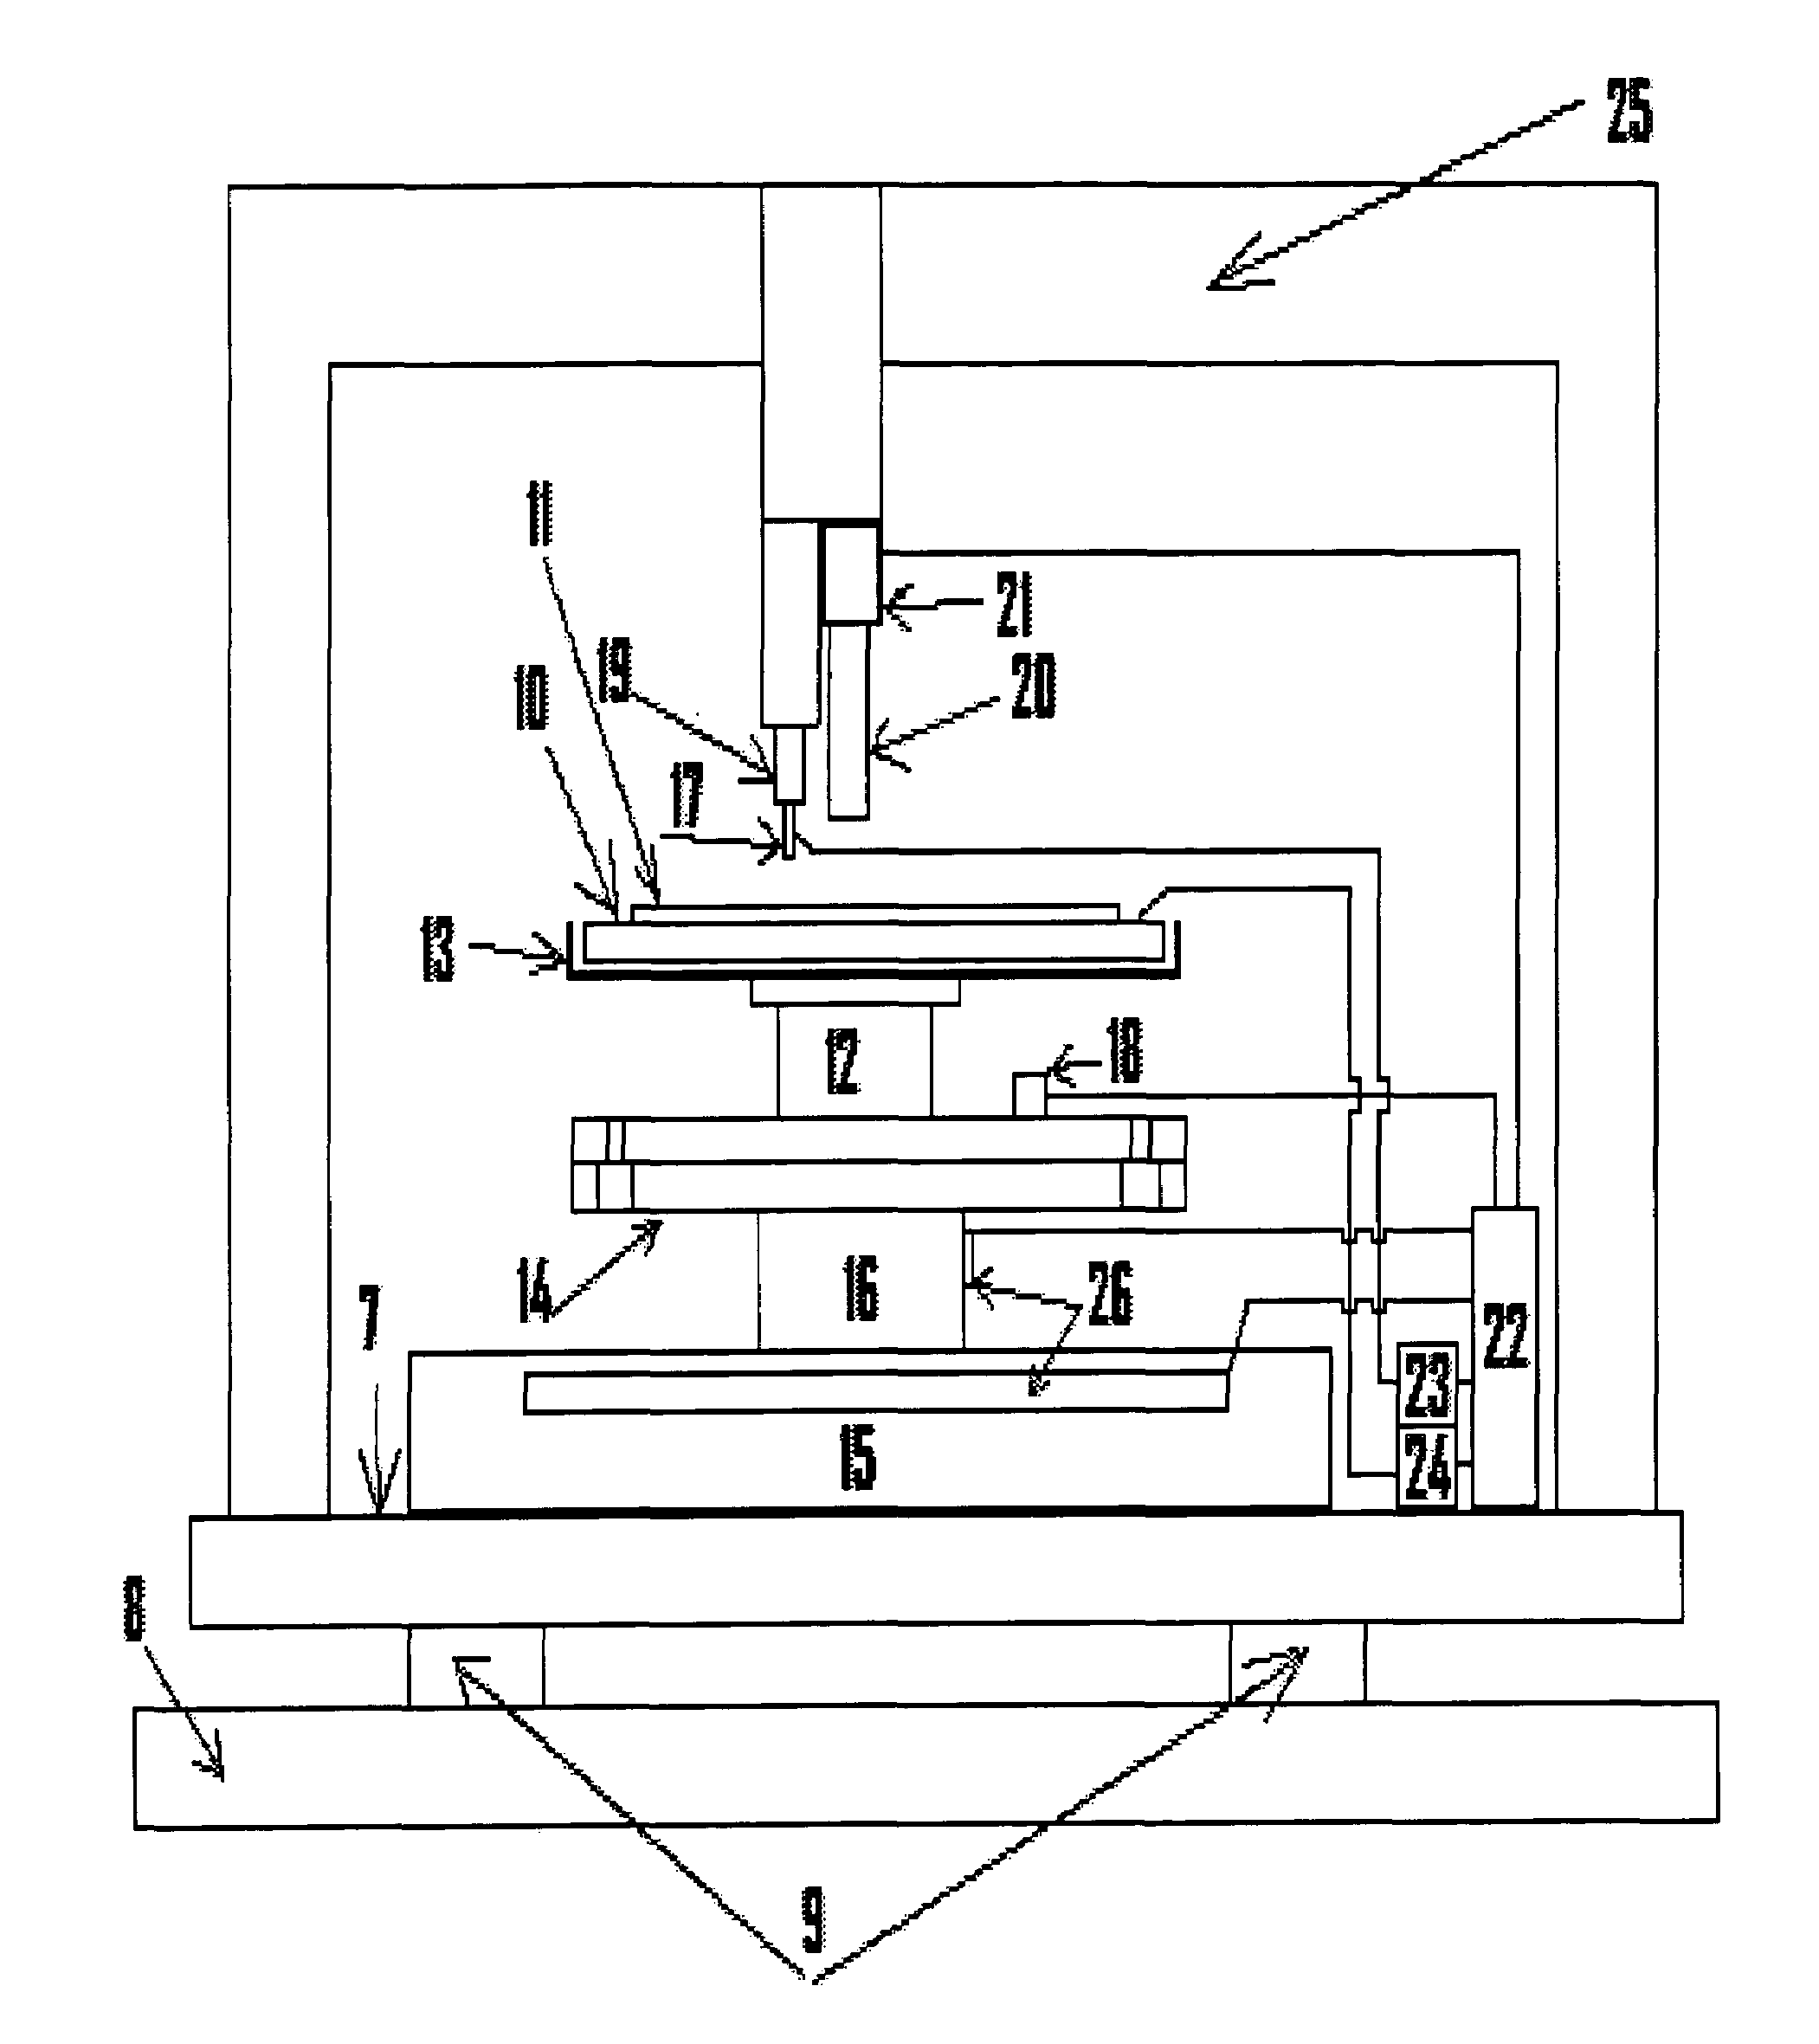 Apparatus for measuring of thin dielectric layer properties on semiconductor wafers with contact self aligning electrodes